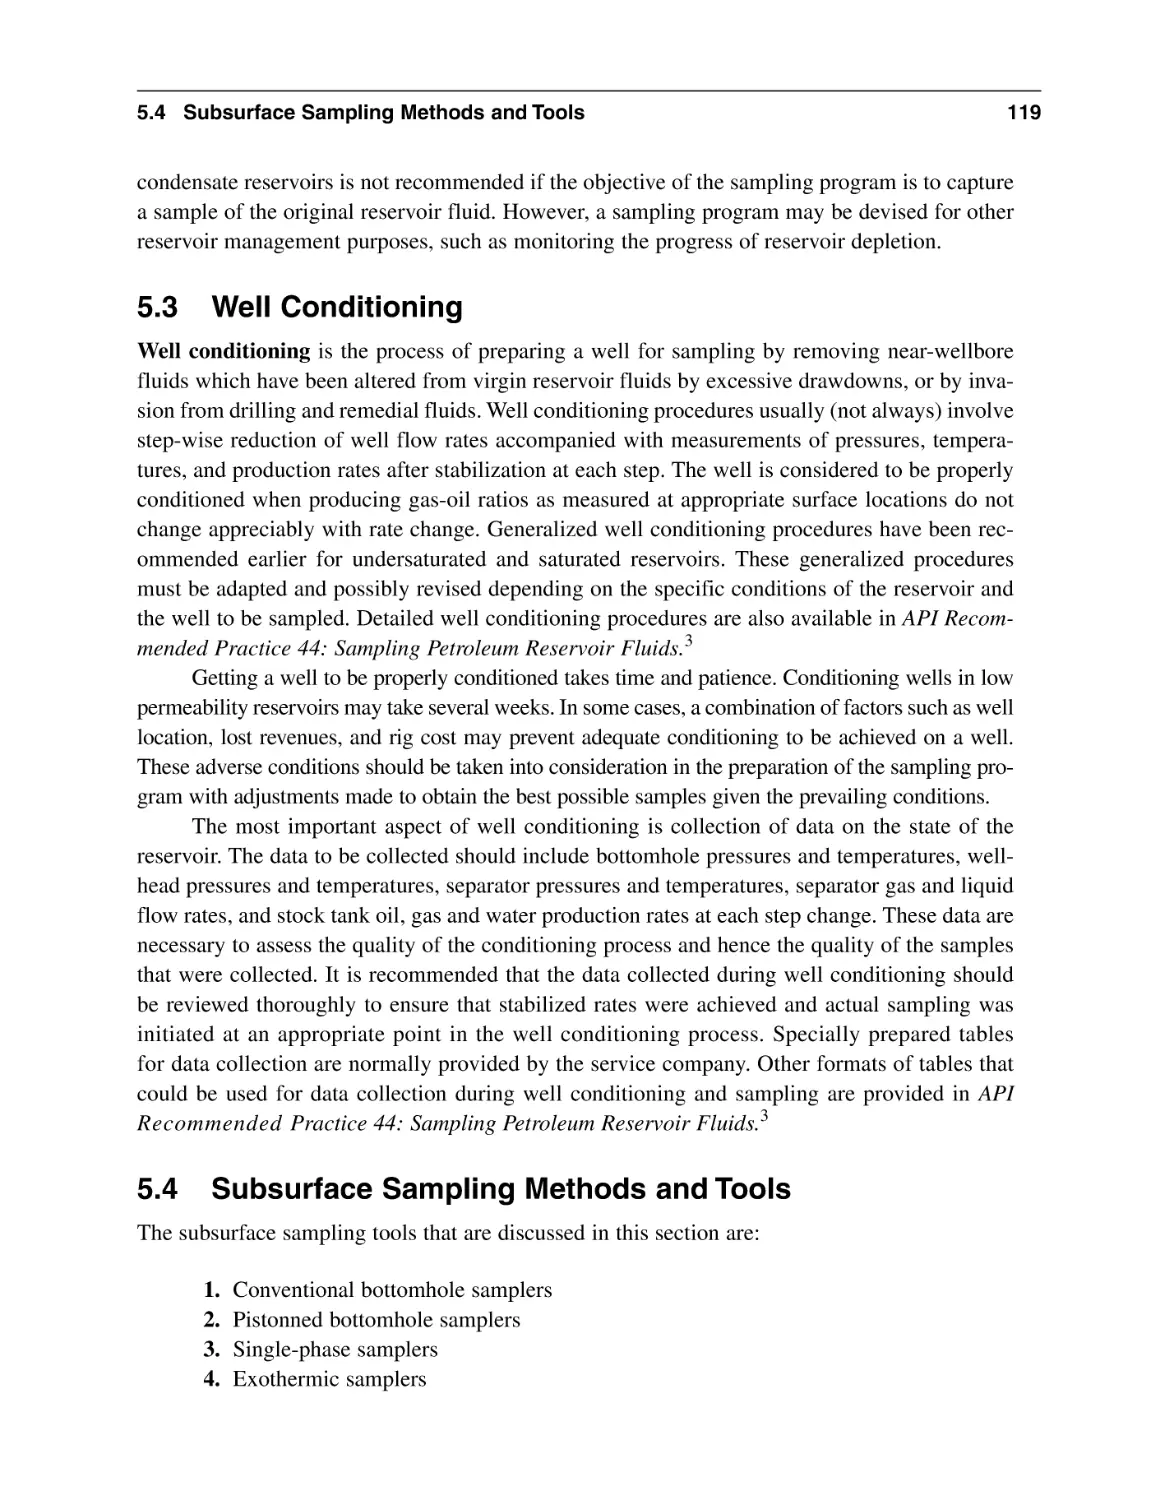 5.3 Well Conditioning
5.4 Subsurface Sampling Methods and Tools